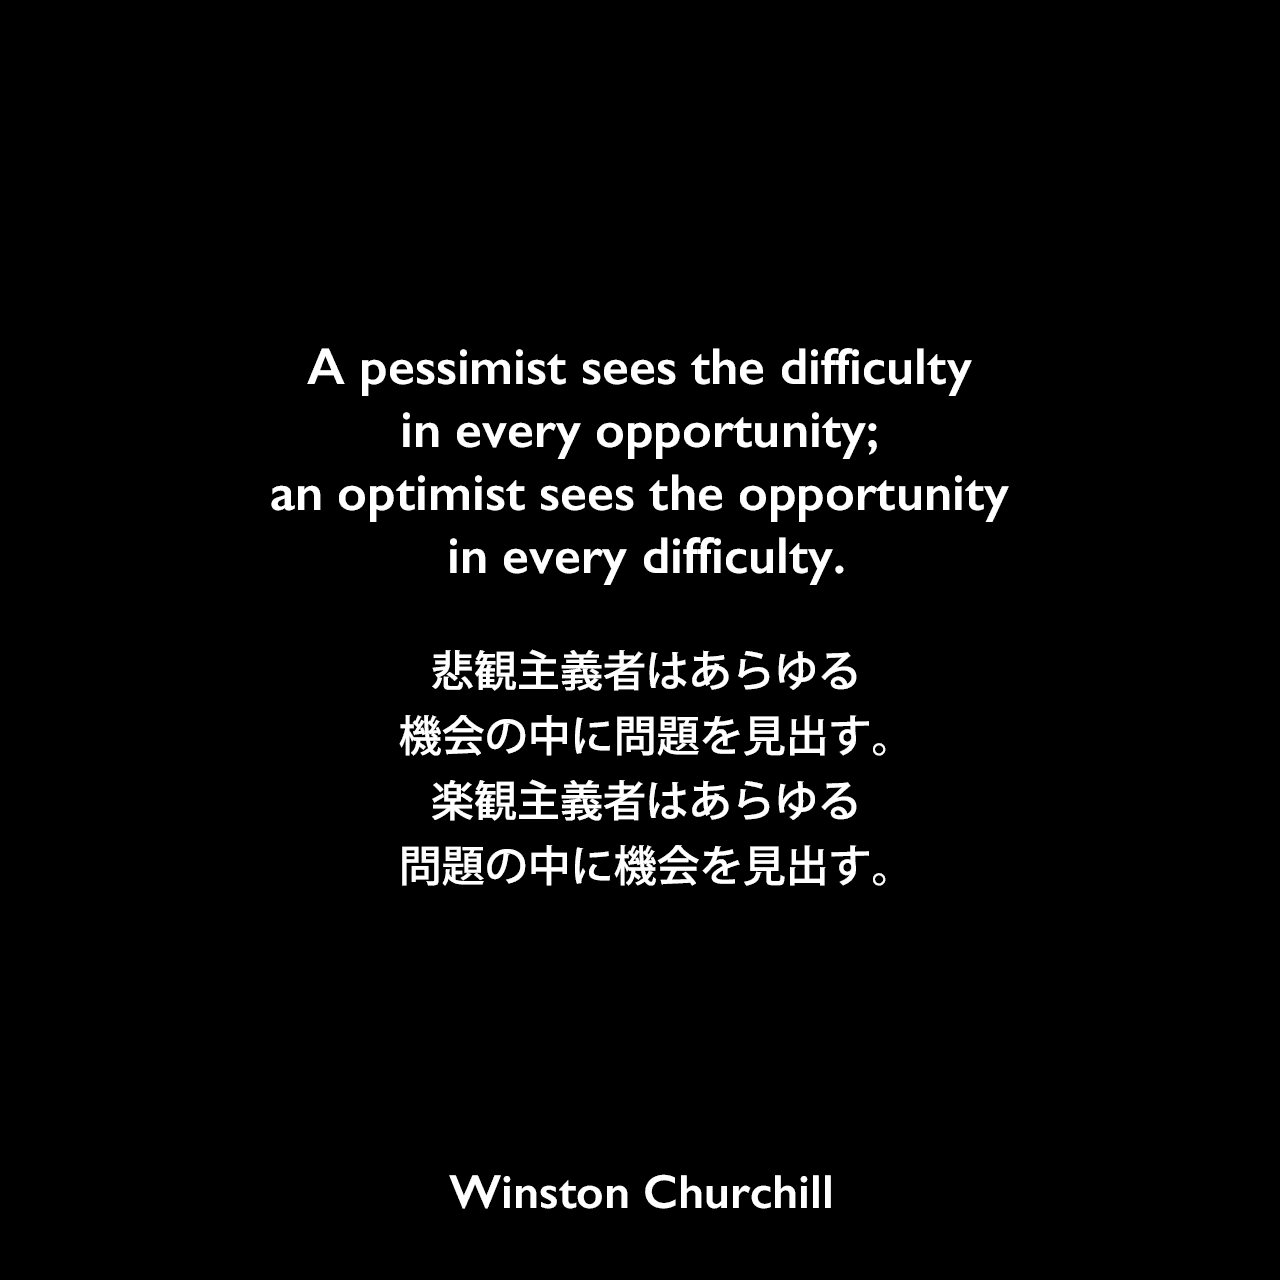 A pessimist sees the difficulty in every opportunity; an optimist sees the opportunity in every difficulty.悲観主義者はあらゆる機会の中に問題を見出す。楽観主義者はあらゆる問題の中に機会を見出す。Winston Churchill